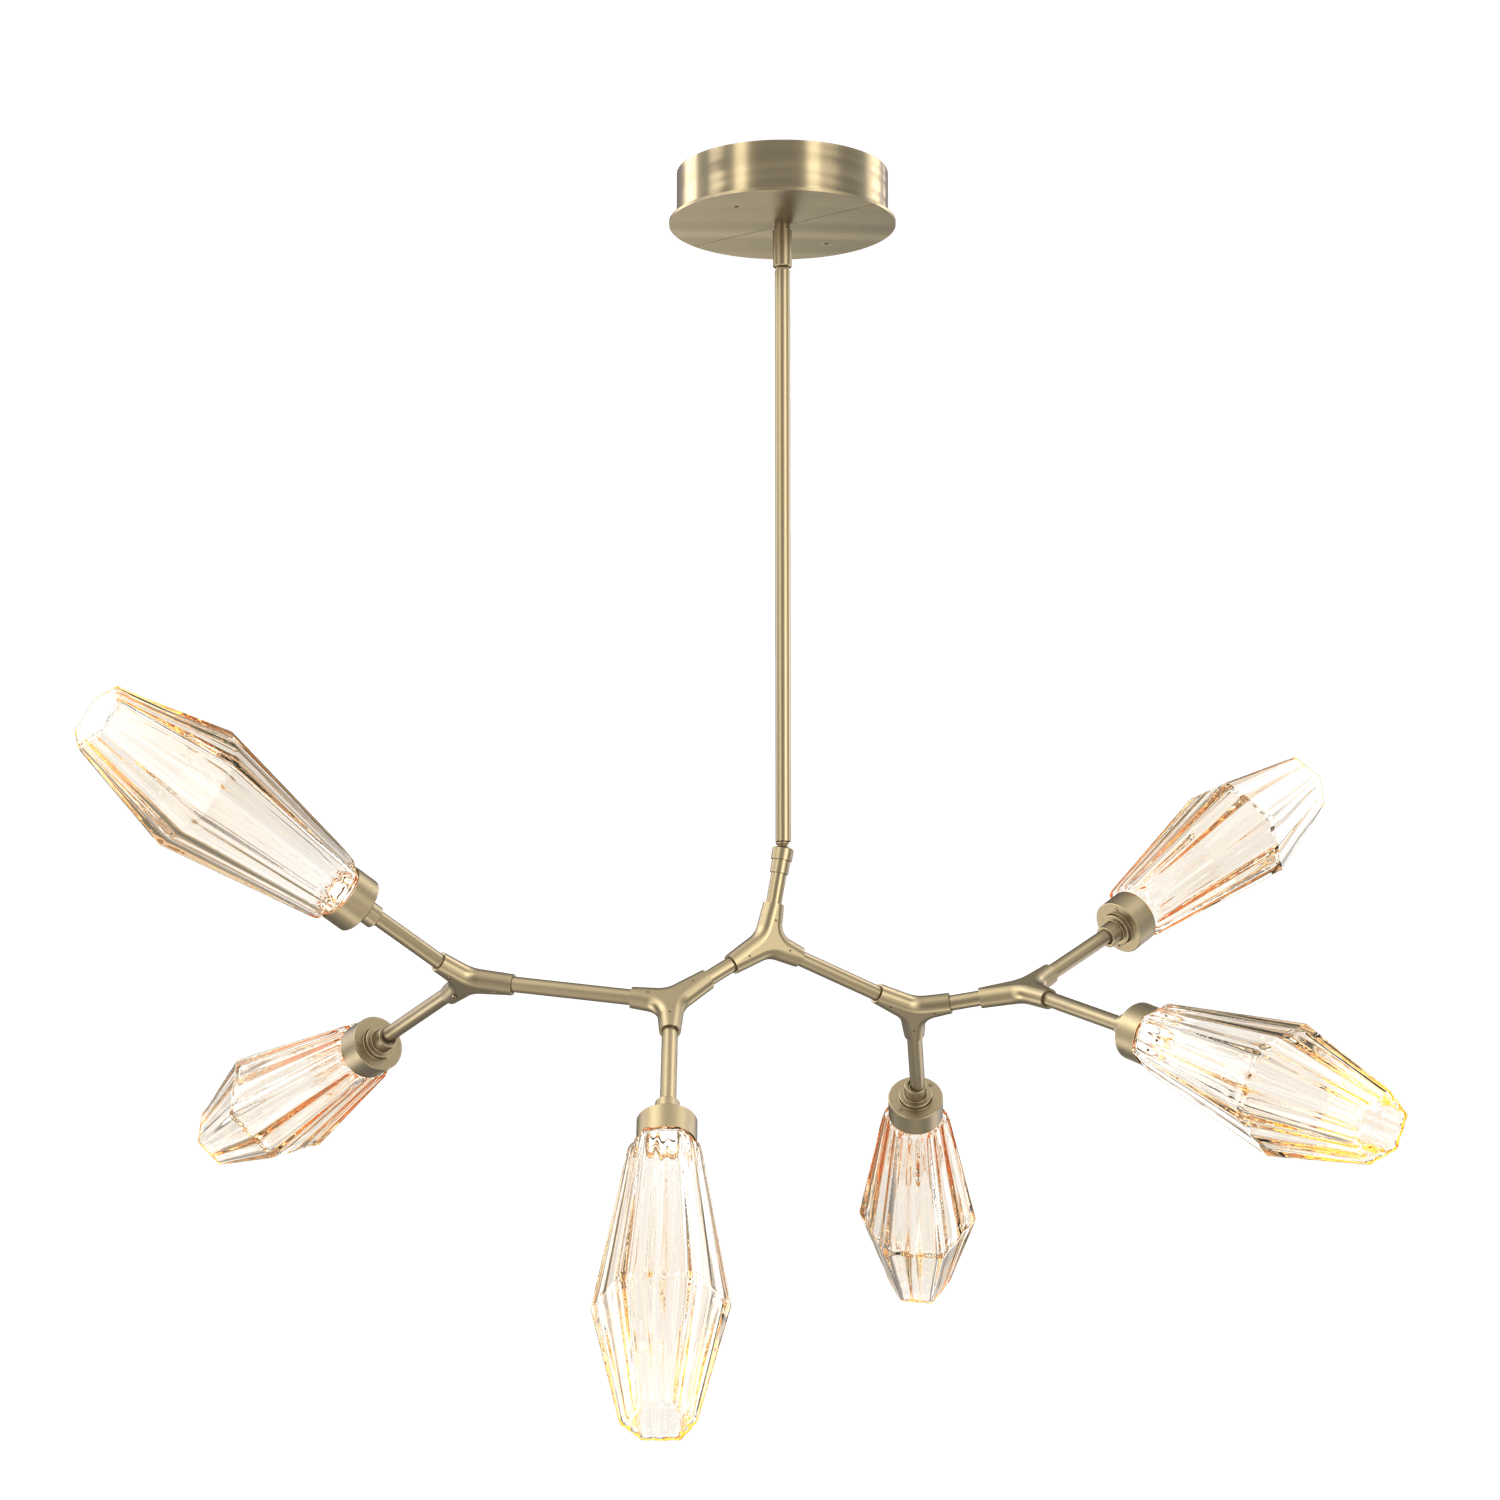 PLB0049-BA-HB-RA-Hammerton-Studio-Aalto-6-light-modern-branch-chandelier-with-heritage-brass-finish-and-optic-ribbed-amber-glass-shades-and-LED-lamping